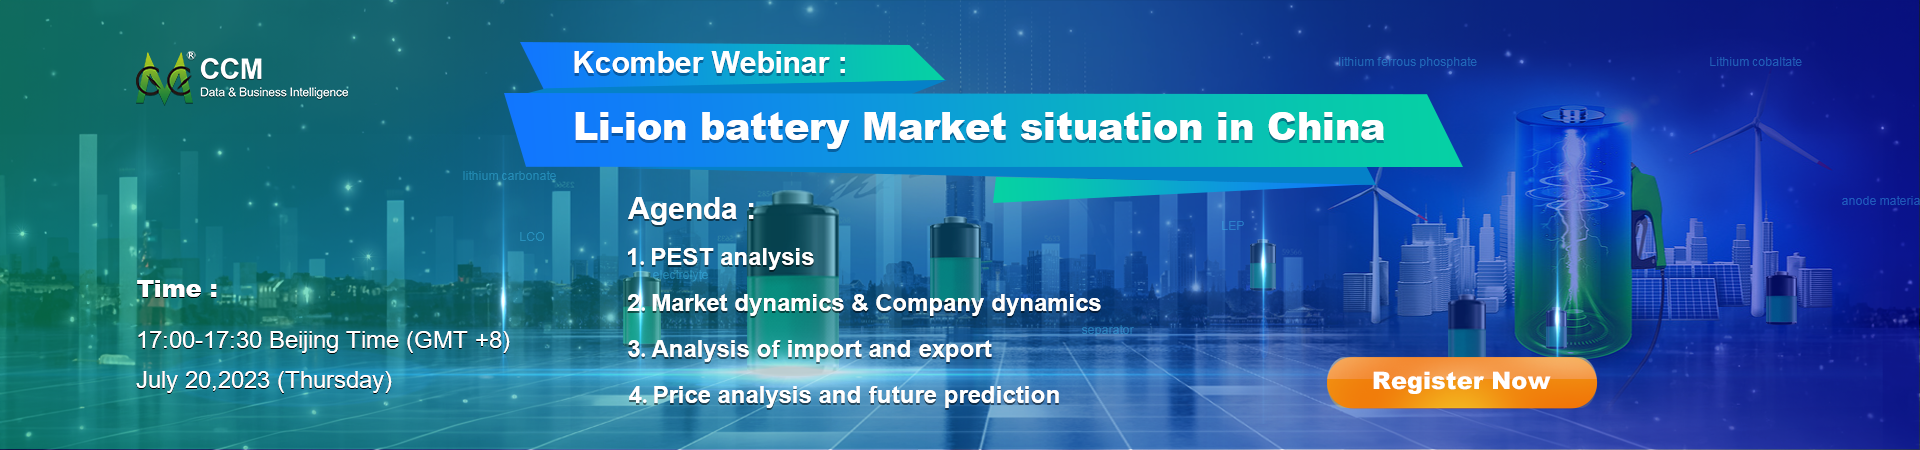 Li-ion battery Market situation in China